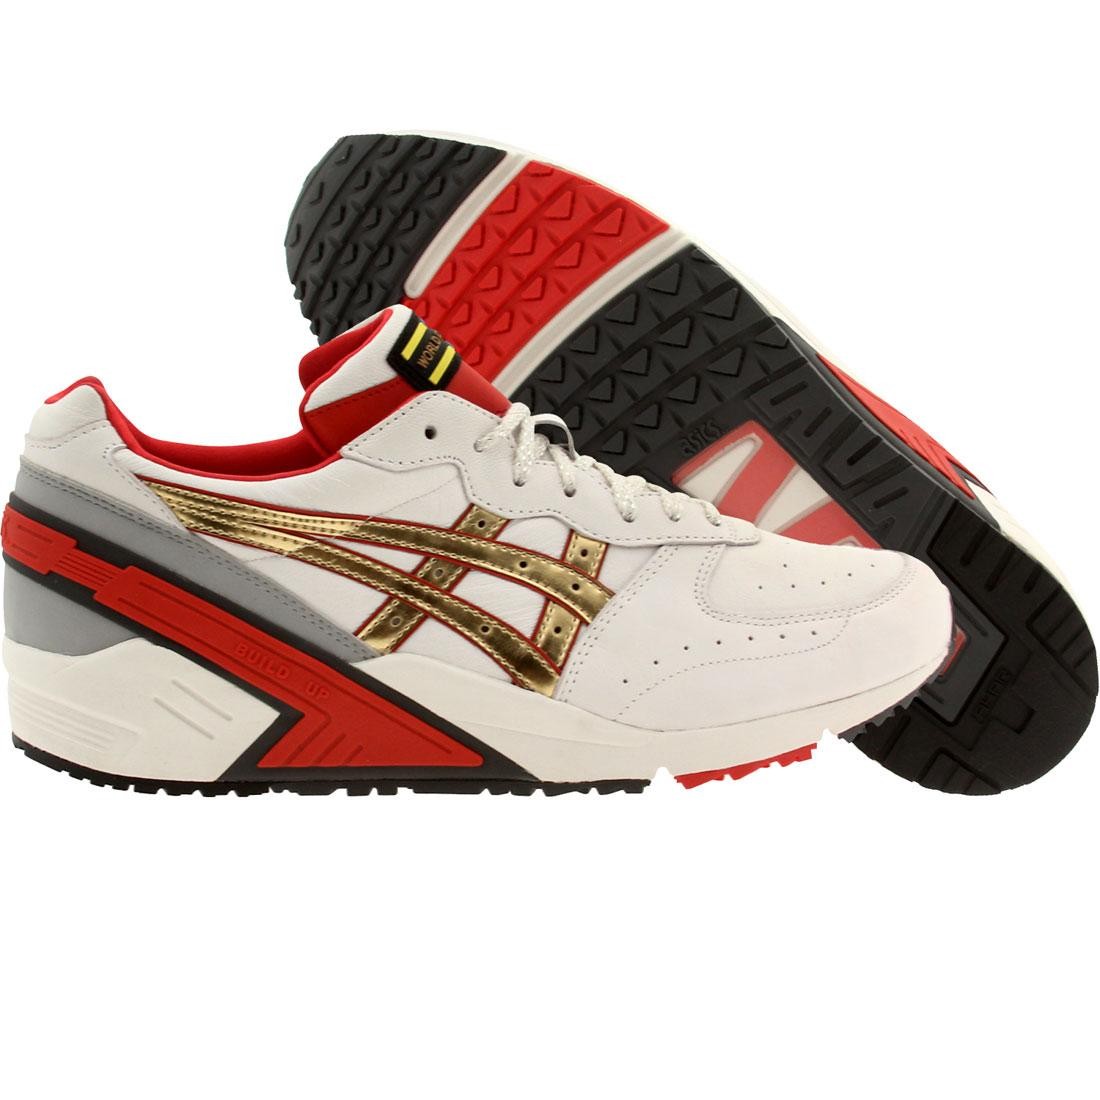 asics shoes red and white